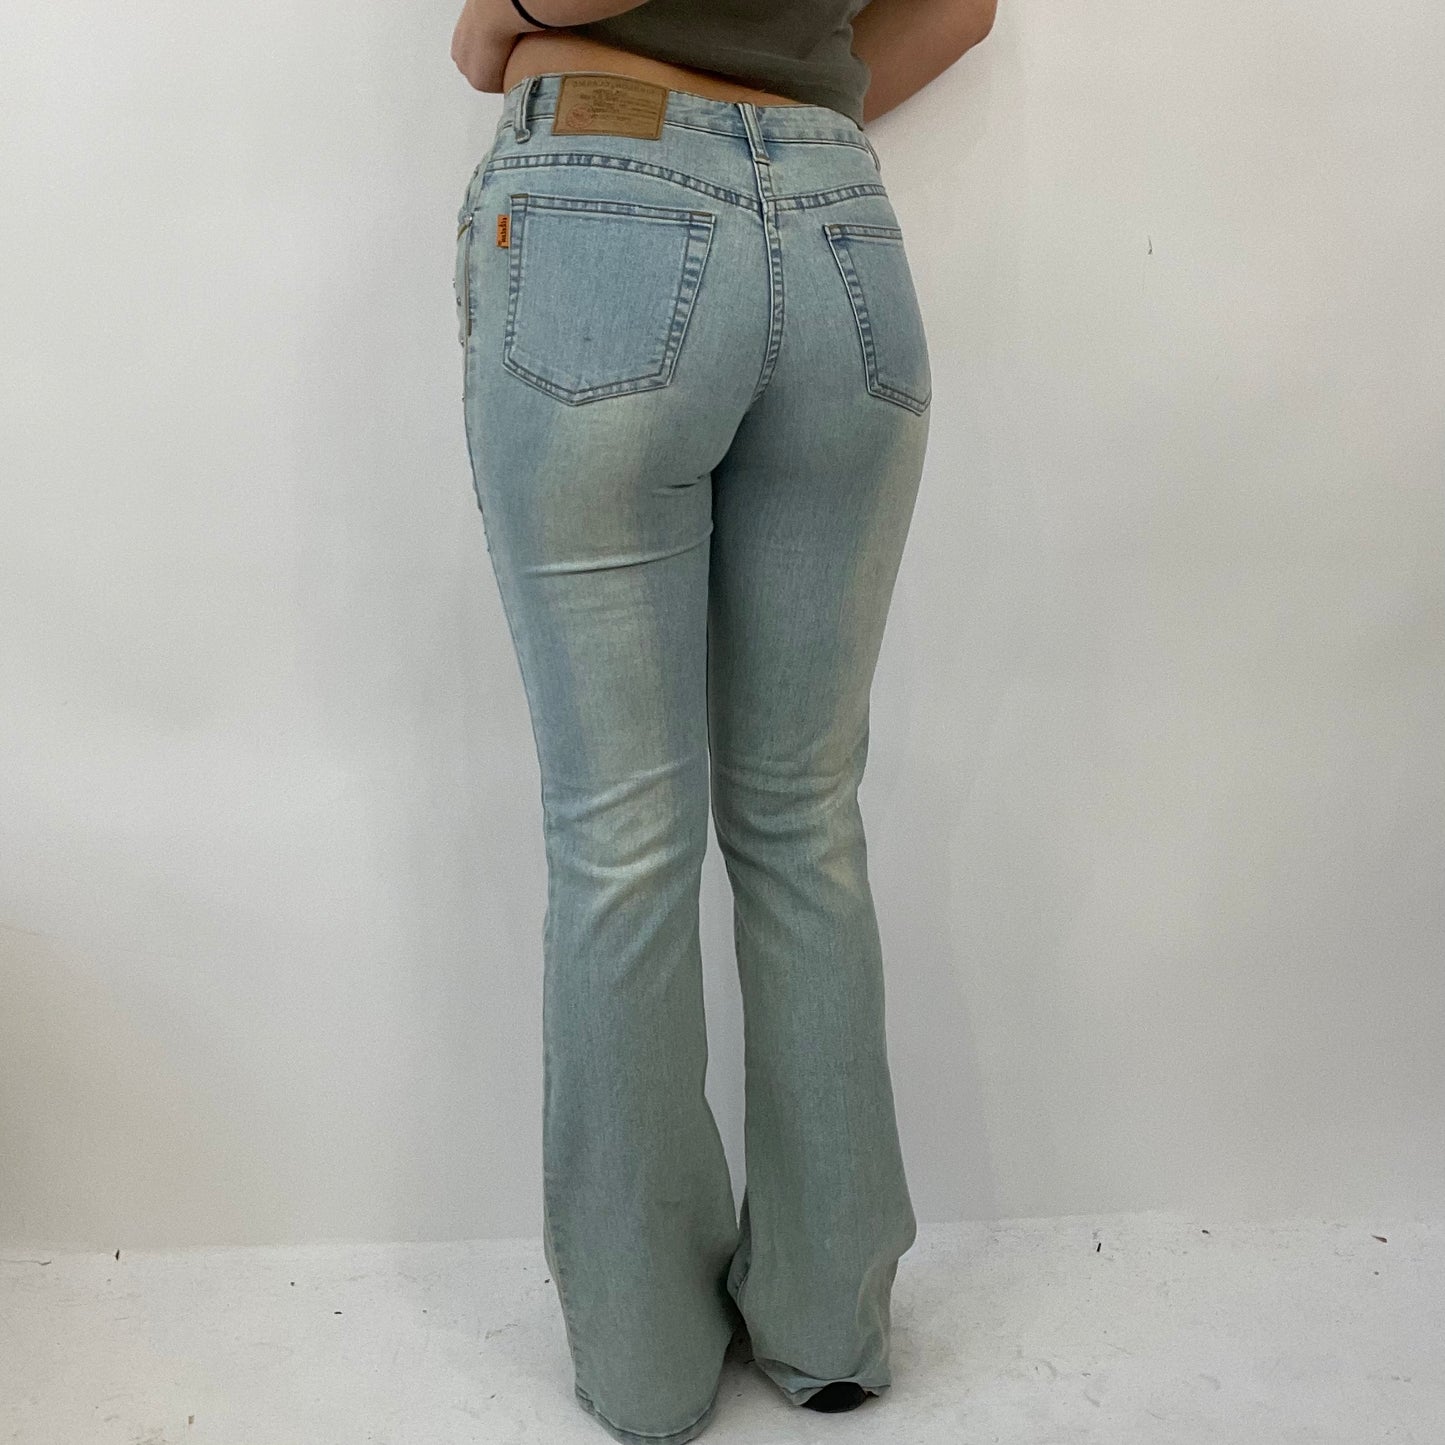 COTTAGECORE DROP | small light blue denim jeans with embroidery